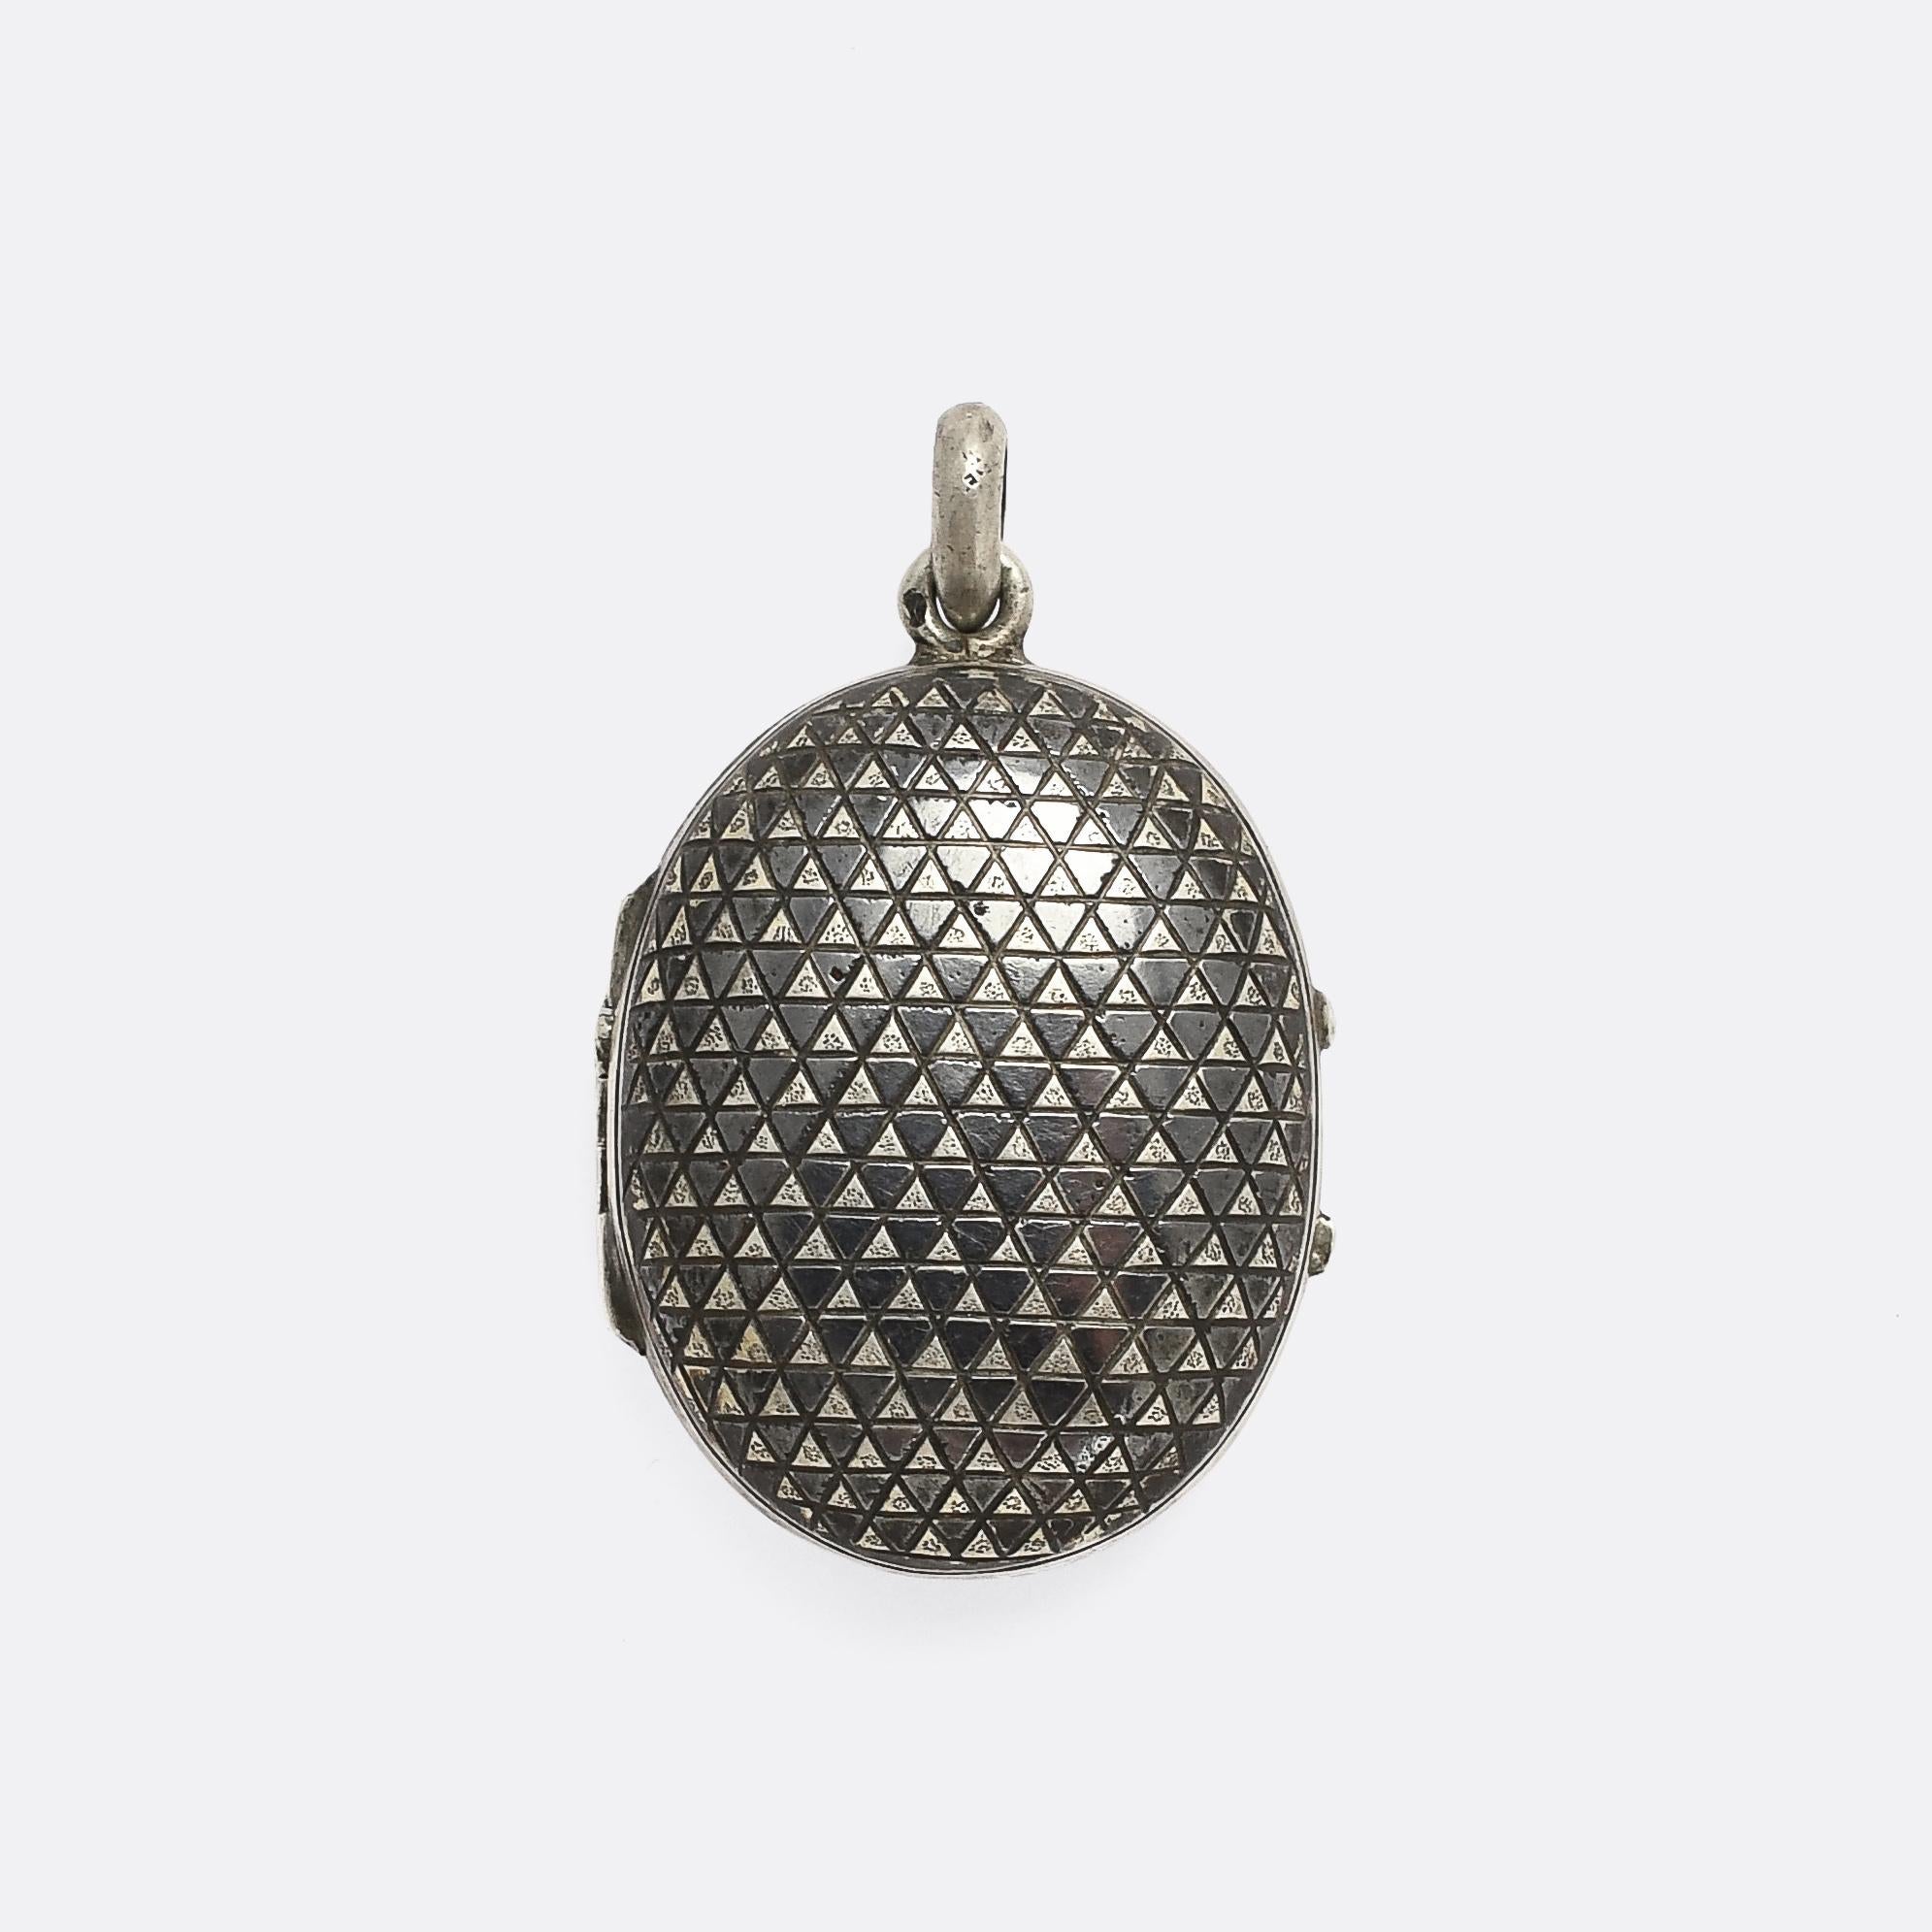 A striking Victorian oval locket crafted in niello silver. Somewhat unusual given how convex the outer case is, coupled with its ever so slightly diminutive size. The surface sports rows of alternating black and silver triangles to create a pleasing